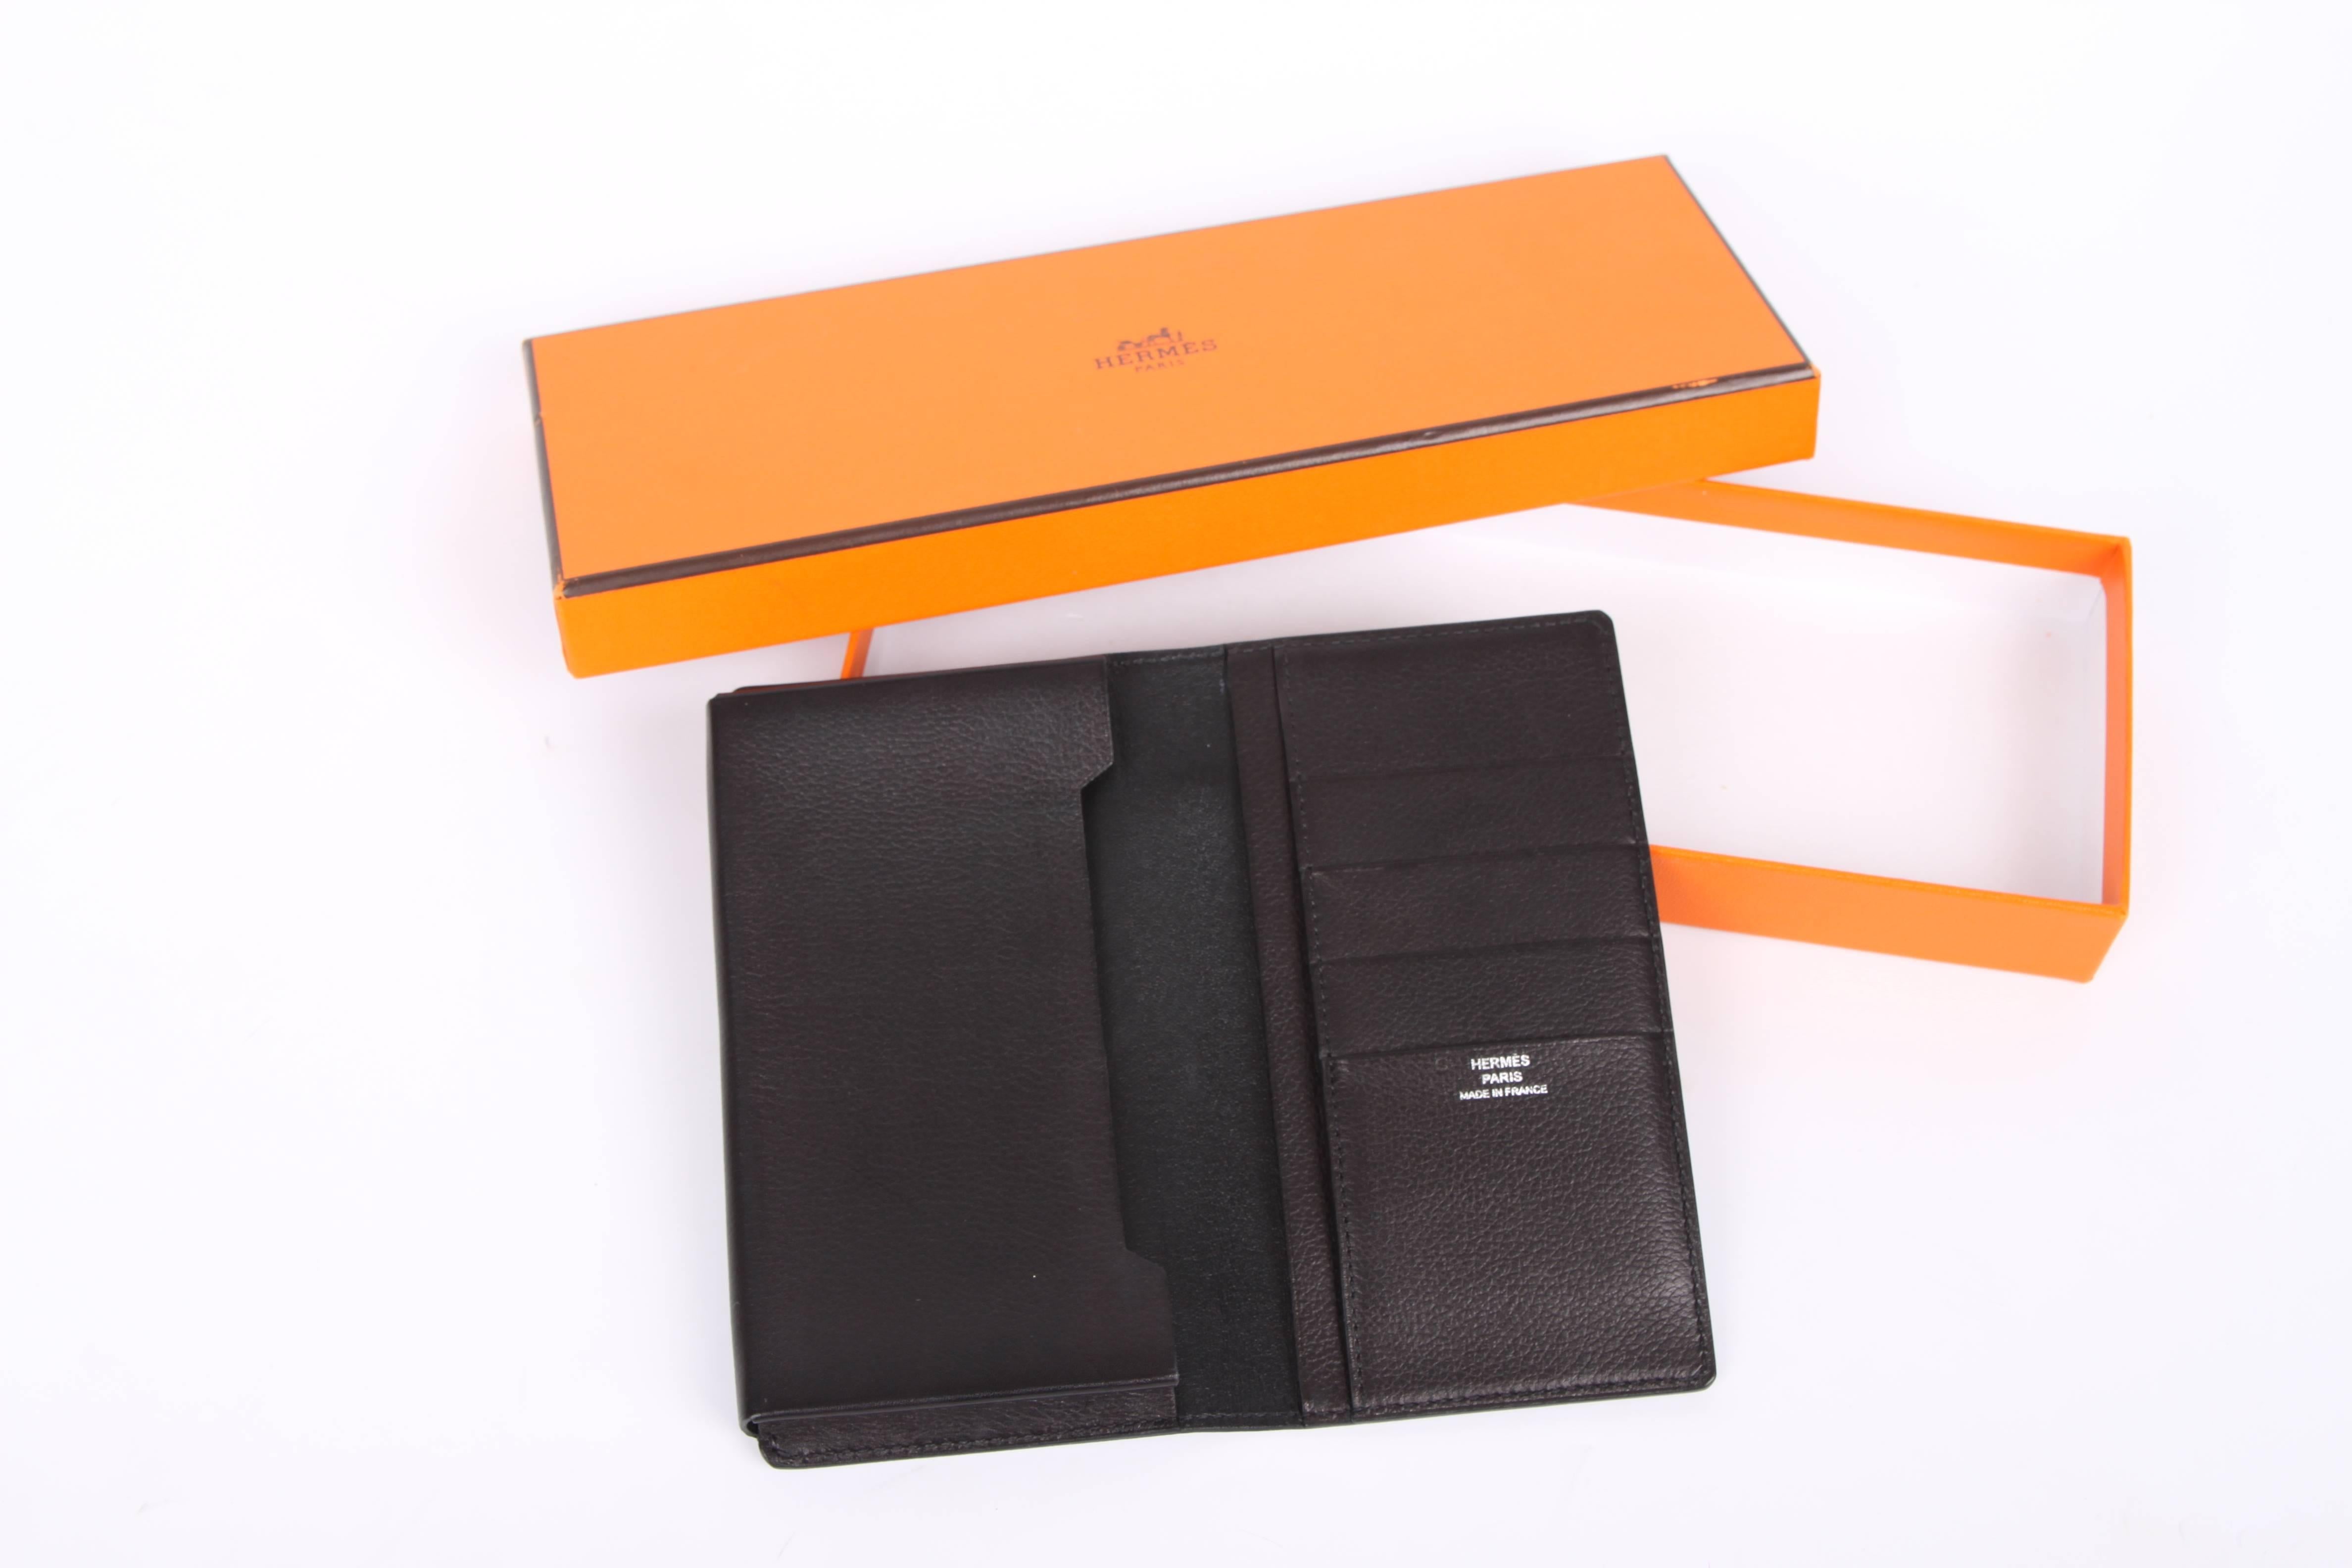 Hermès crafted this handy case for your smartphone; the Hermès Smart Case Large.

Made of black Gulliver Swift leather, 4 card slots and two additional pockets. And of course a pocket for your smartphone.

Has been used, but still in good condition,